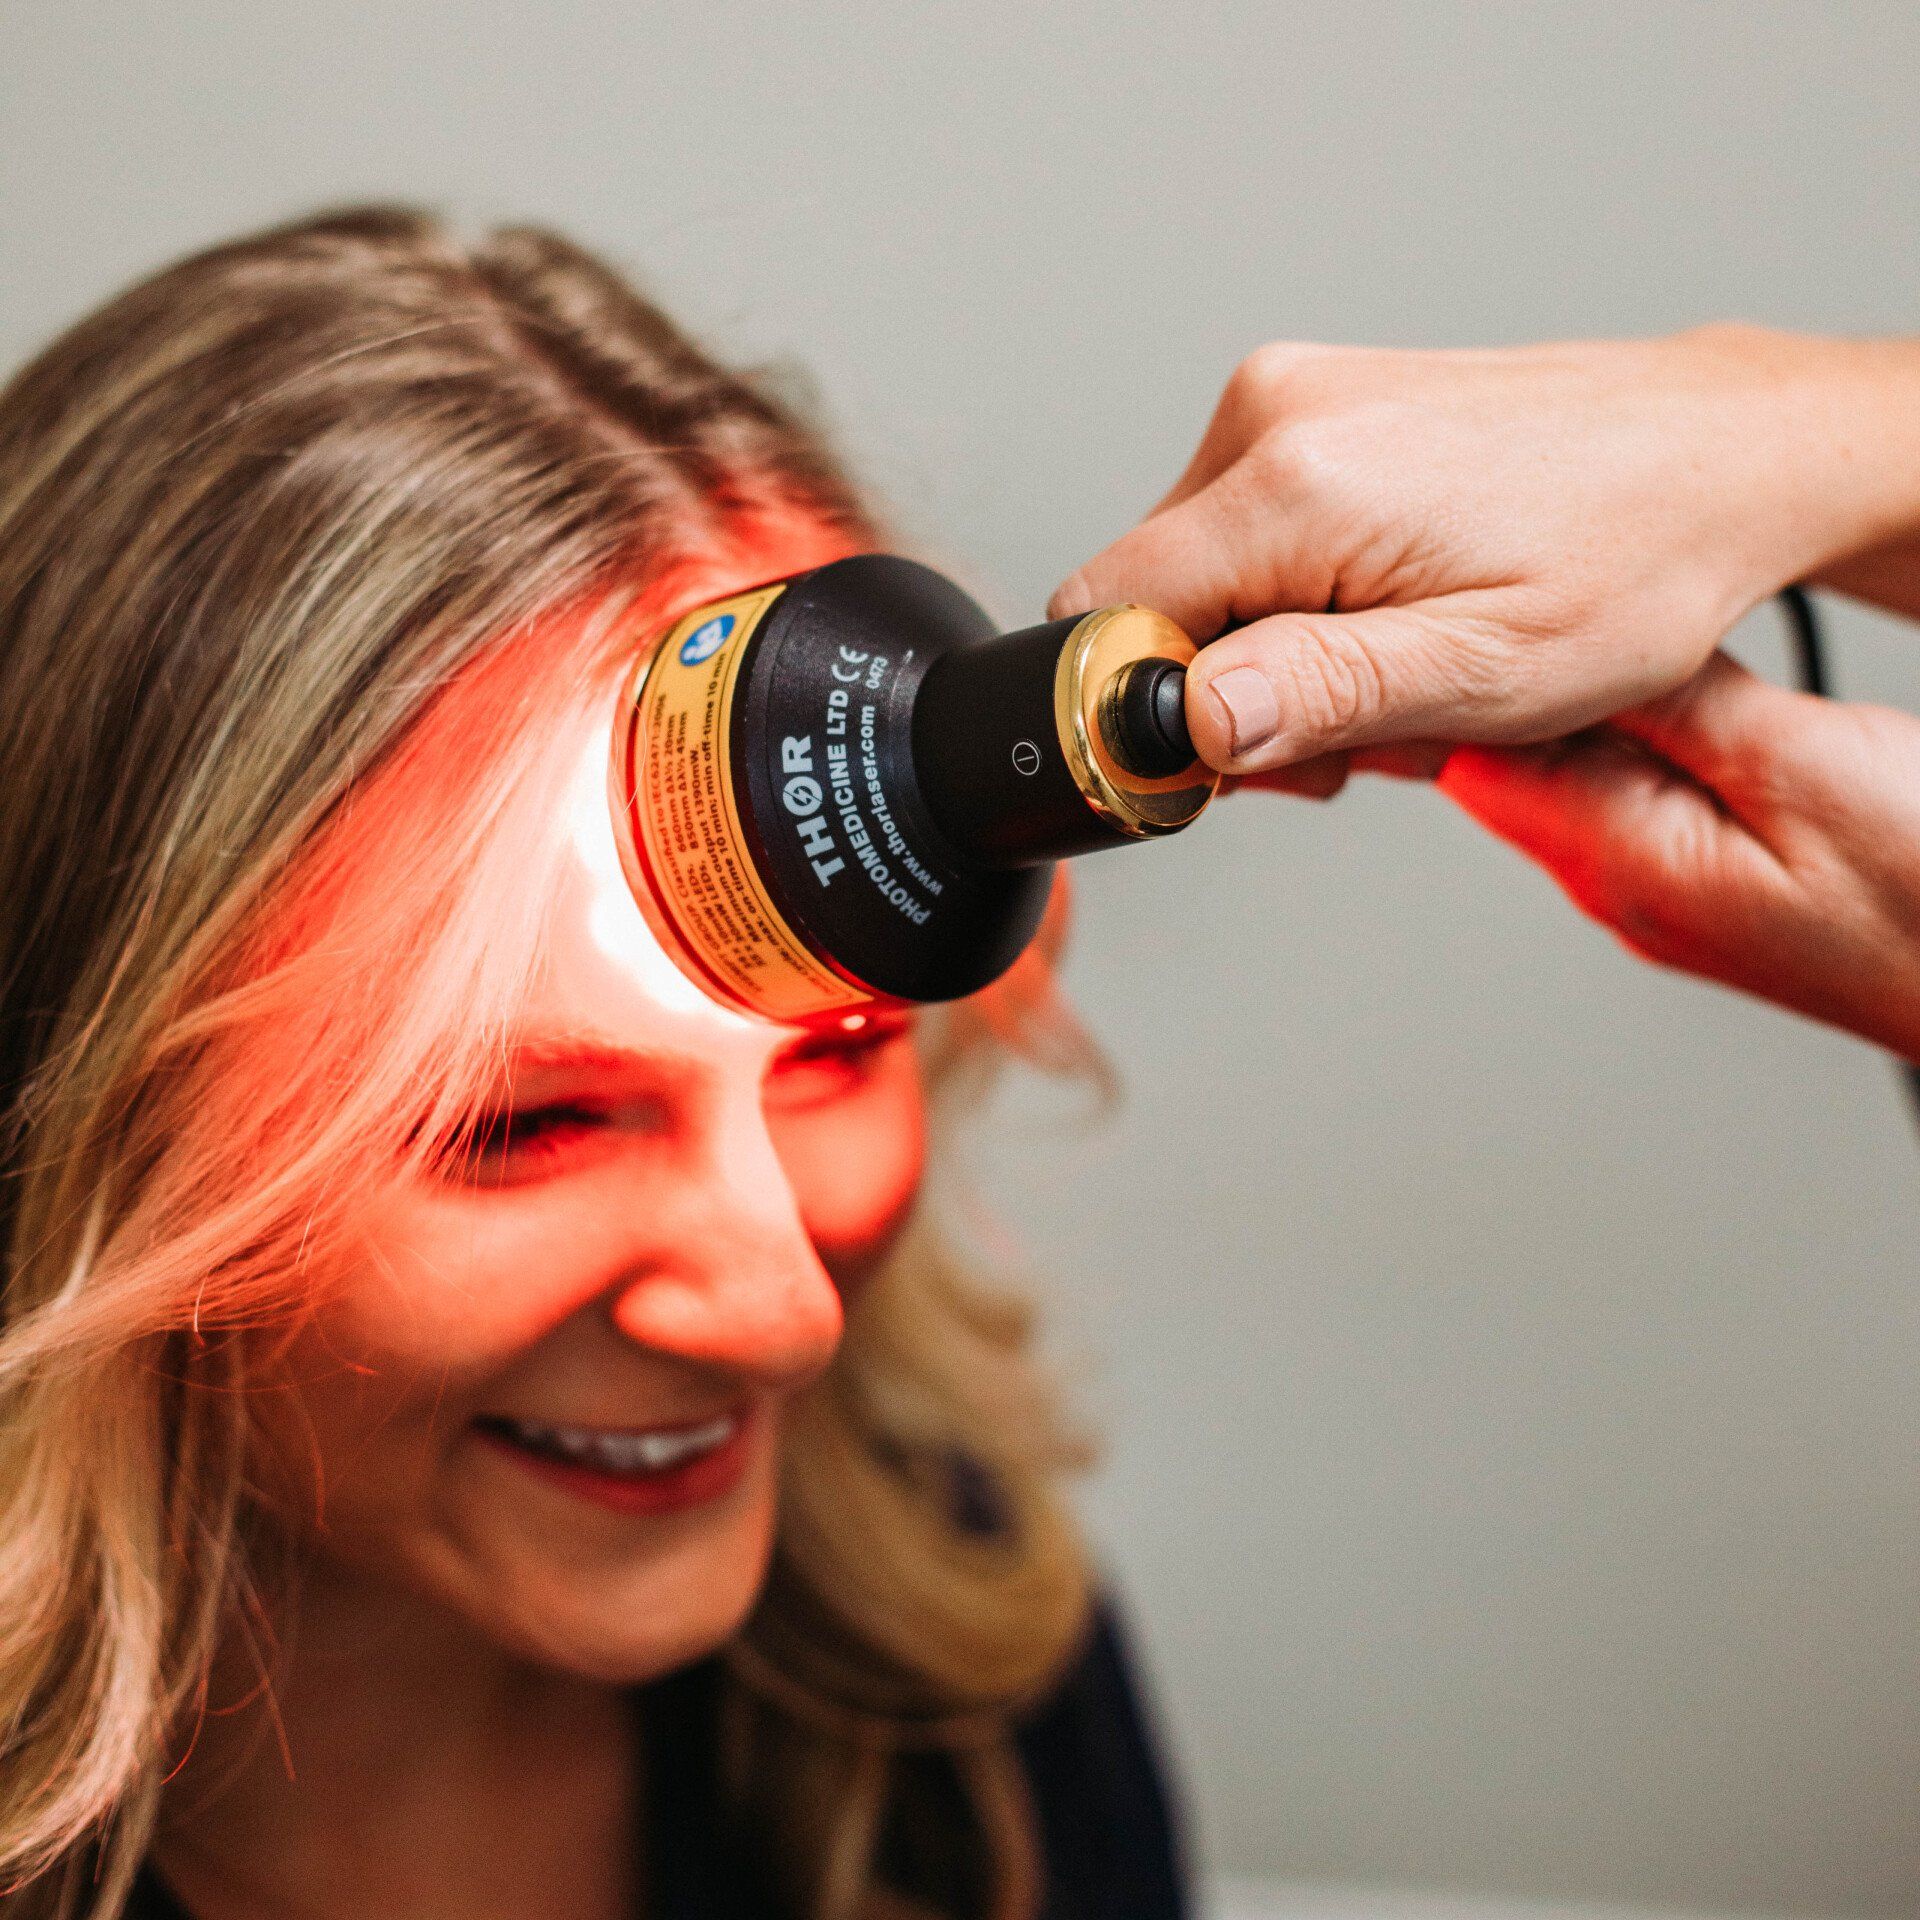 Woman receiving photobiomodulation light therapy treatment on forehead